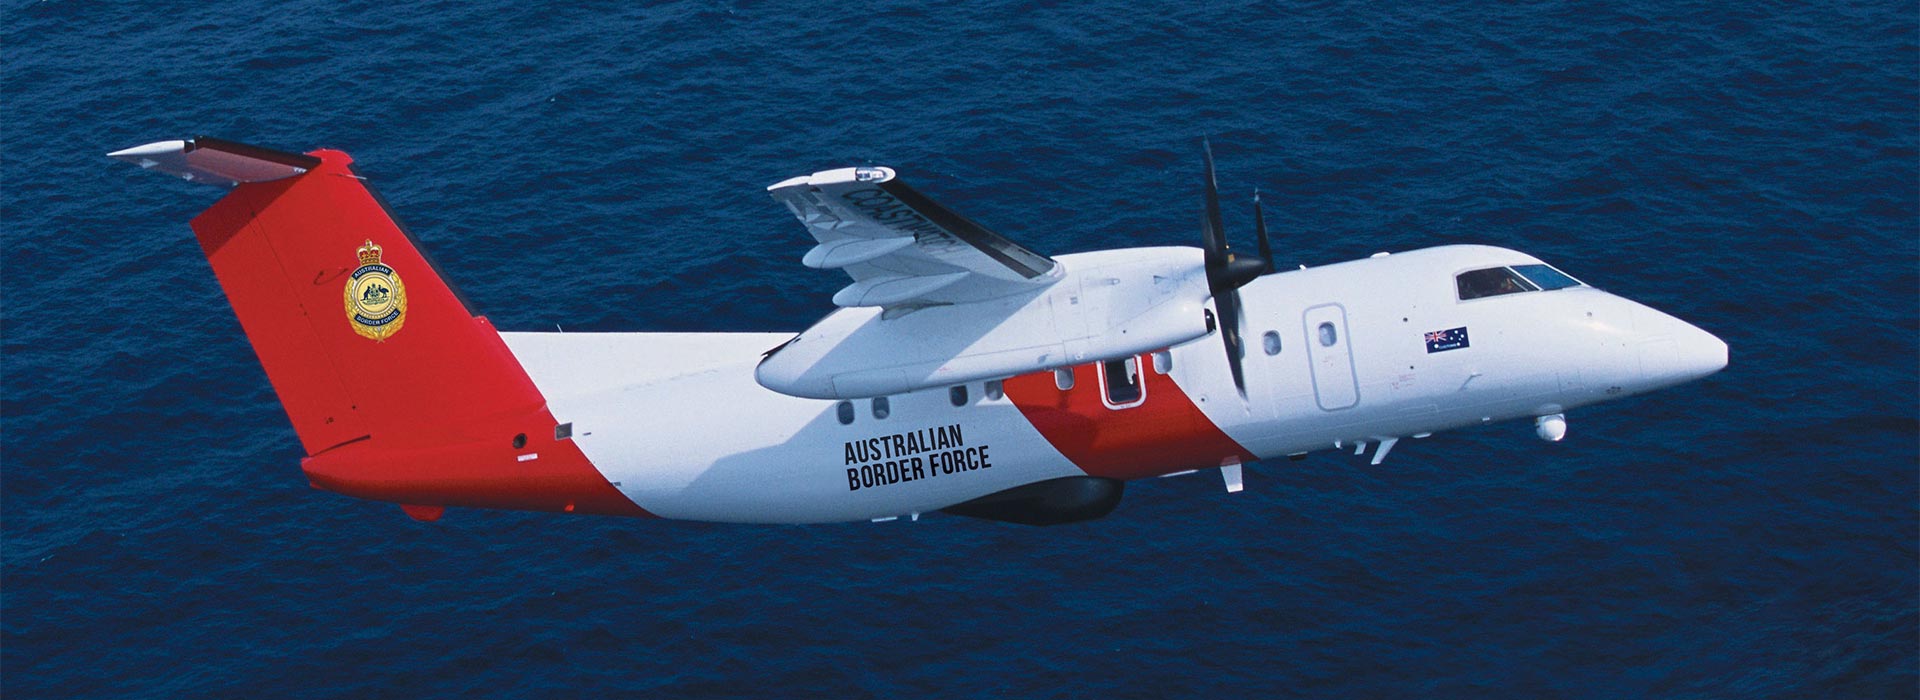 Sentinel Coastwatch Border Force aircraft flying over the sea